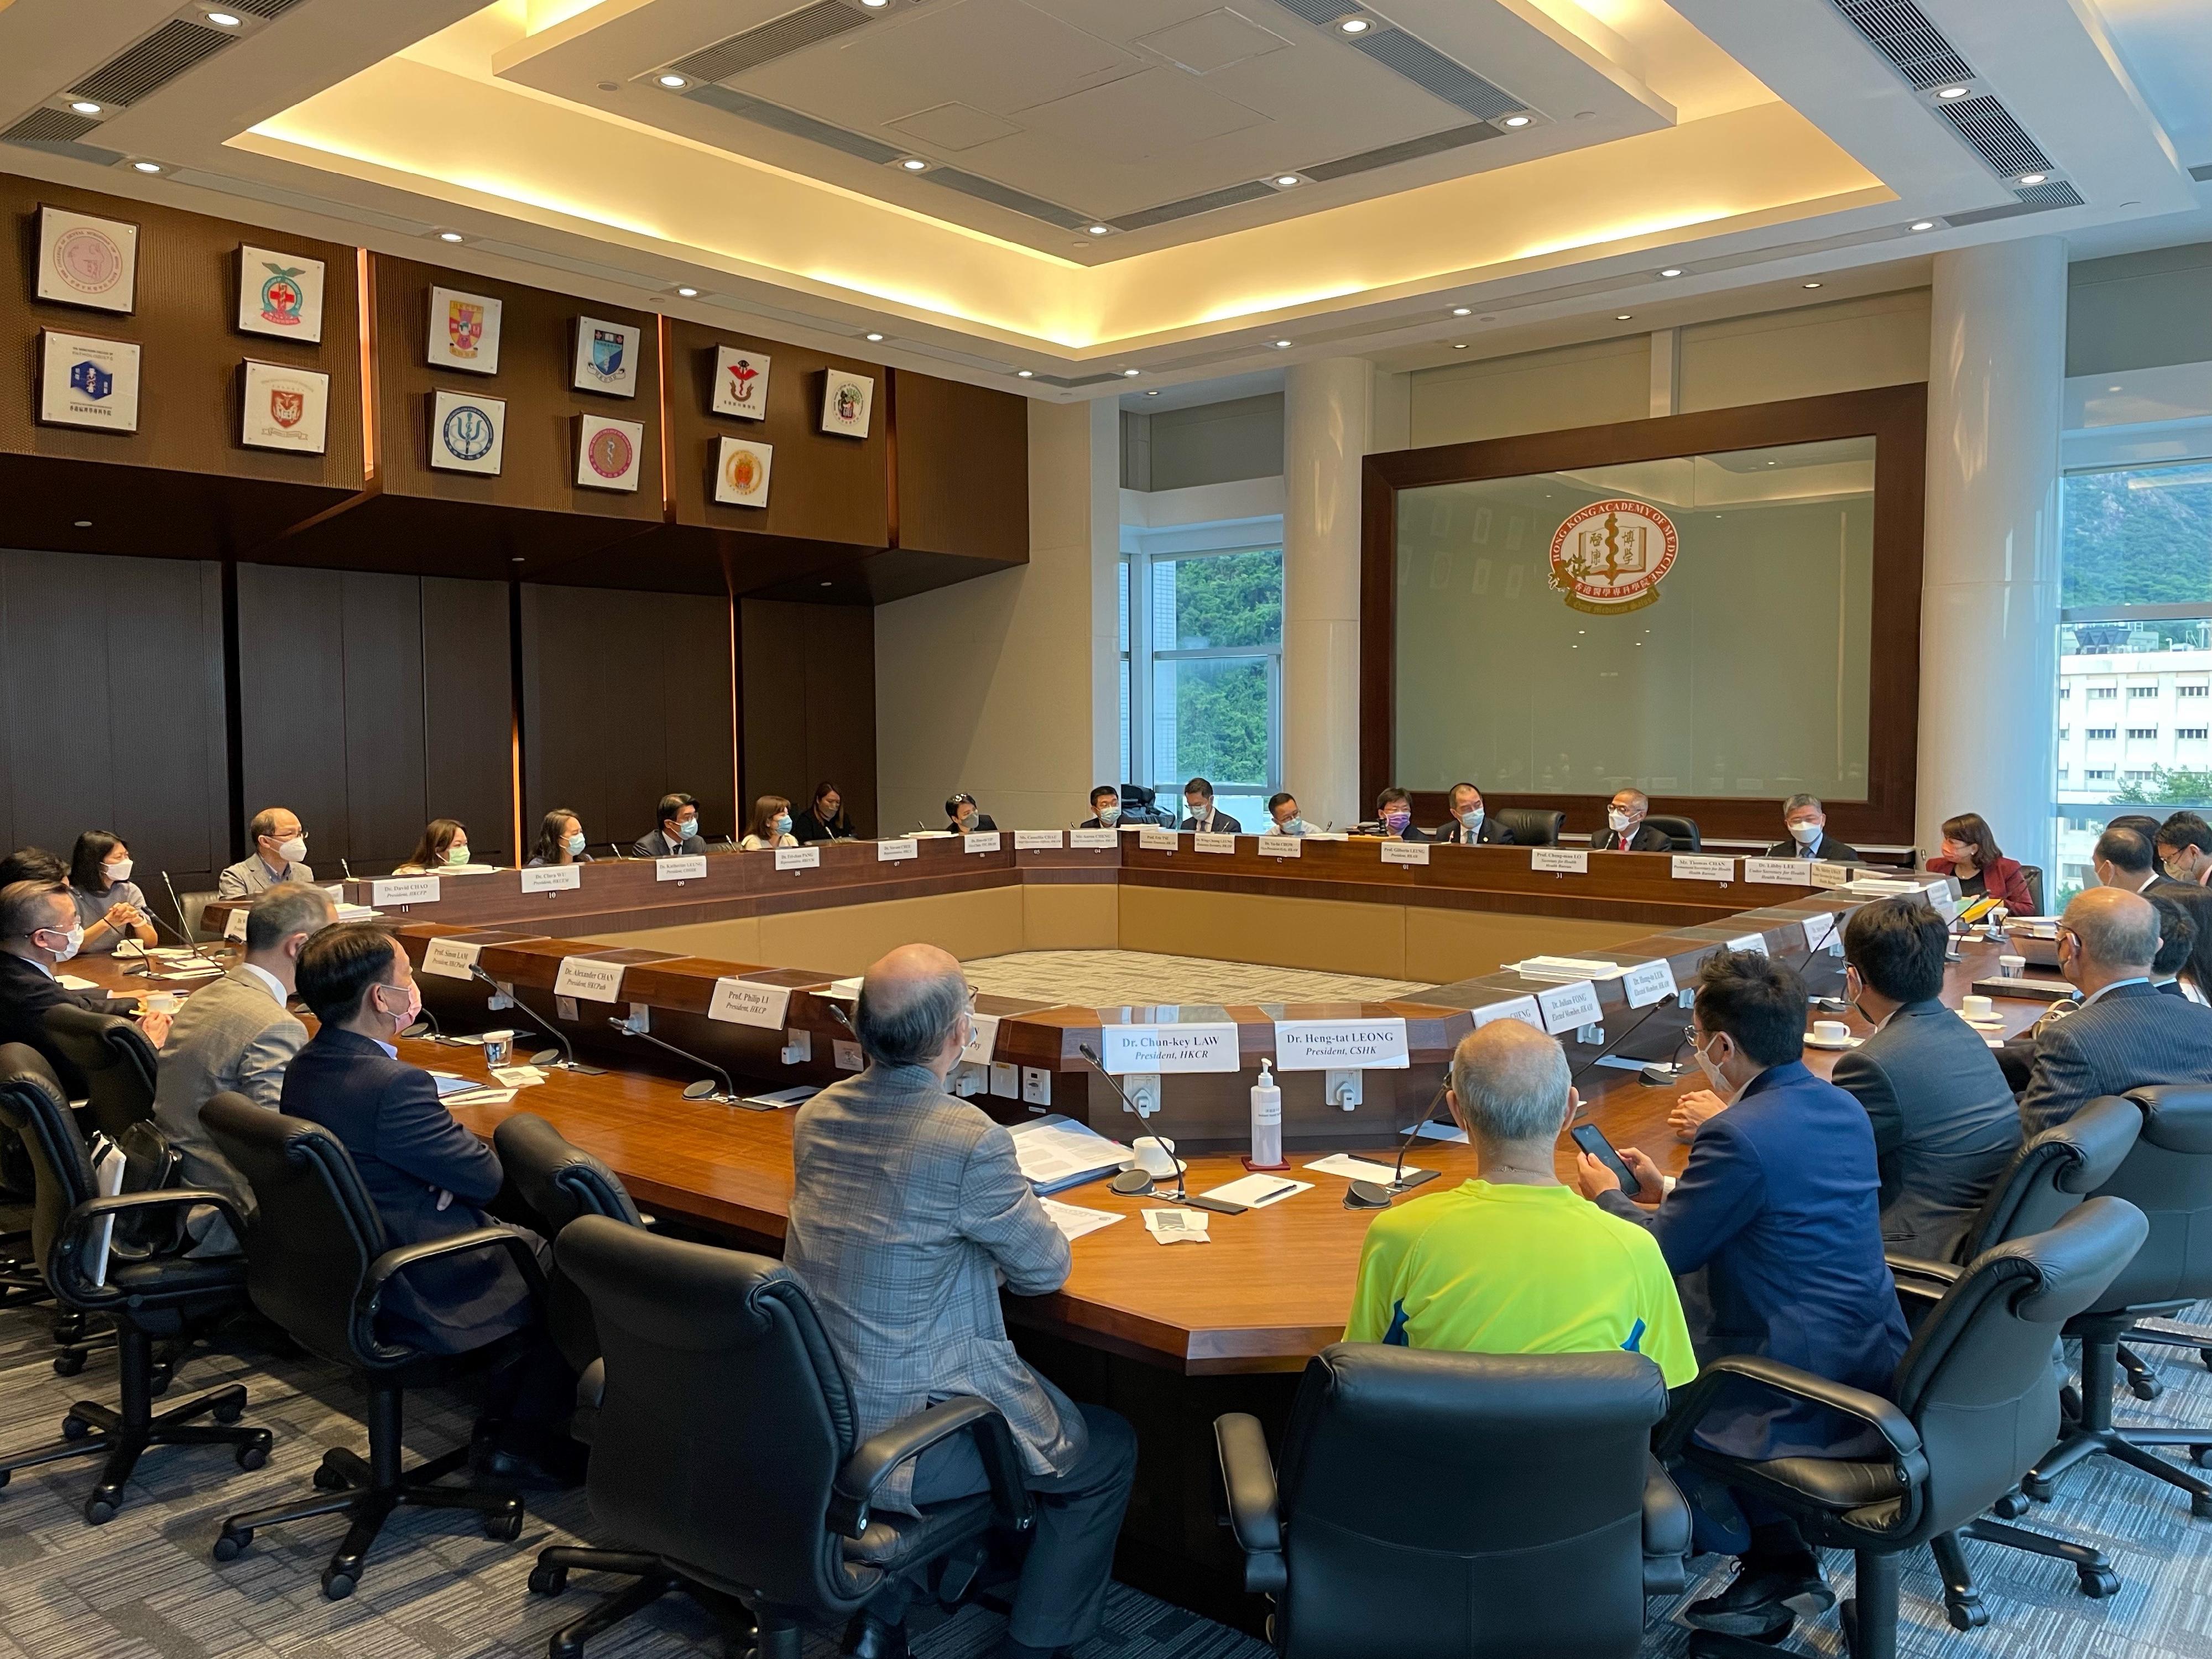 The Secretary for Health, Professor Lo Chung-mau (rear, third right), together with the Permanent Secretary for Health, Mr Thomas Chan (rear, second right), and the Under Secretary for Health, Dr Libby Lee (rear, first right), met with members of the Hong Kong Academy of Medicine today (September 8) to exchange views on various topics in relation to Hong Kong’s healthcare system.
